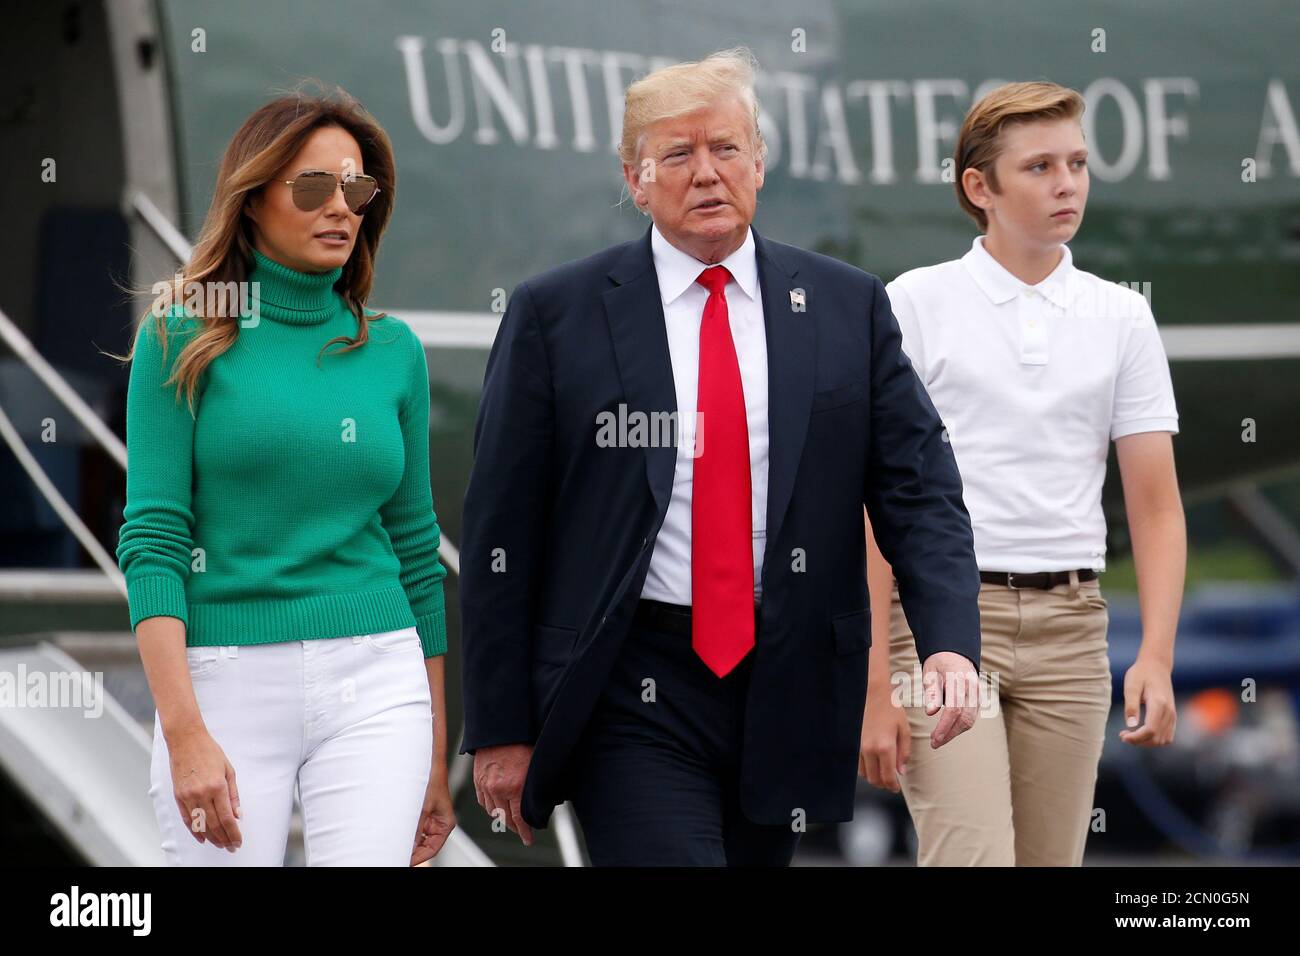 U.S. President Donald Trump boards Air Force One with first lady Melania  Trump and their son Barron in Morristown, New Jersey, U.S., August 19,  2018. REUTERS/Chris Wattie Stock Photo - Alamy